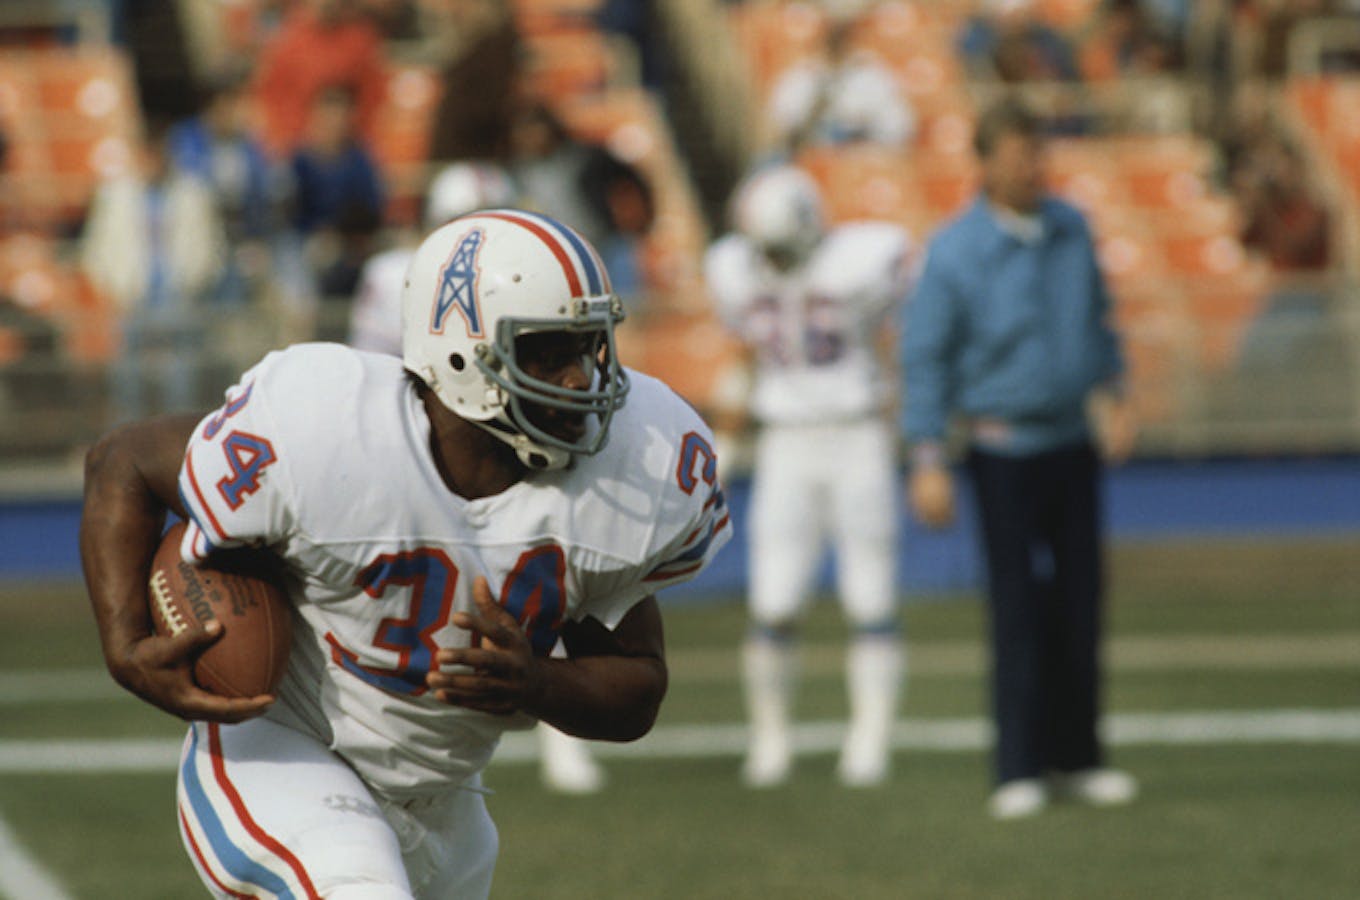 Earl Campbell Named as the Hero of the TX Walk to Cure Arthritis